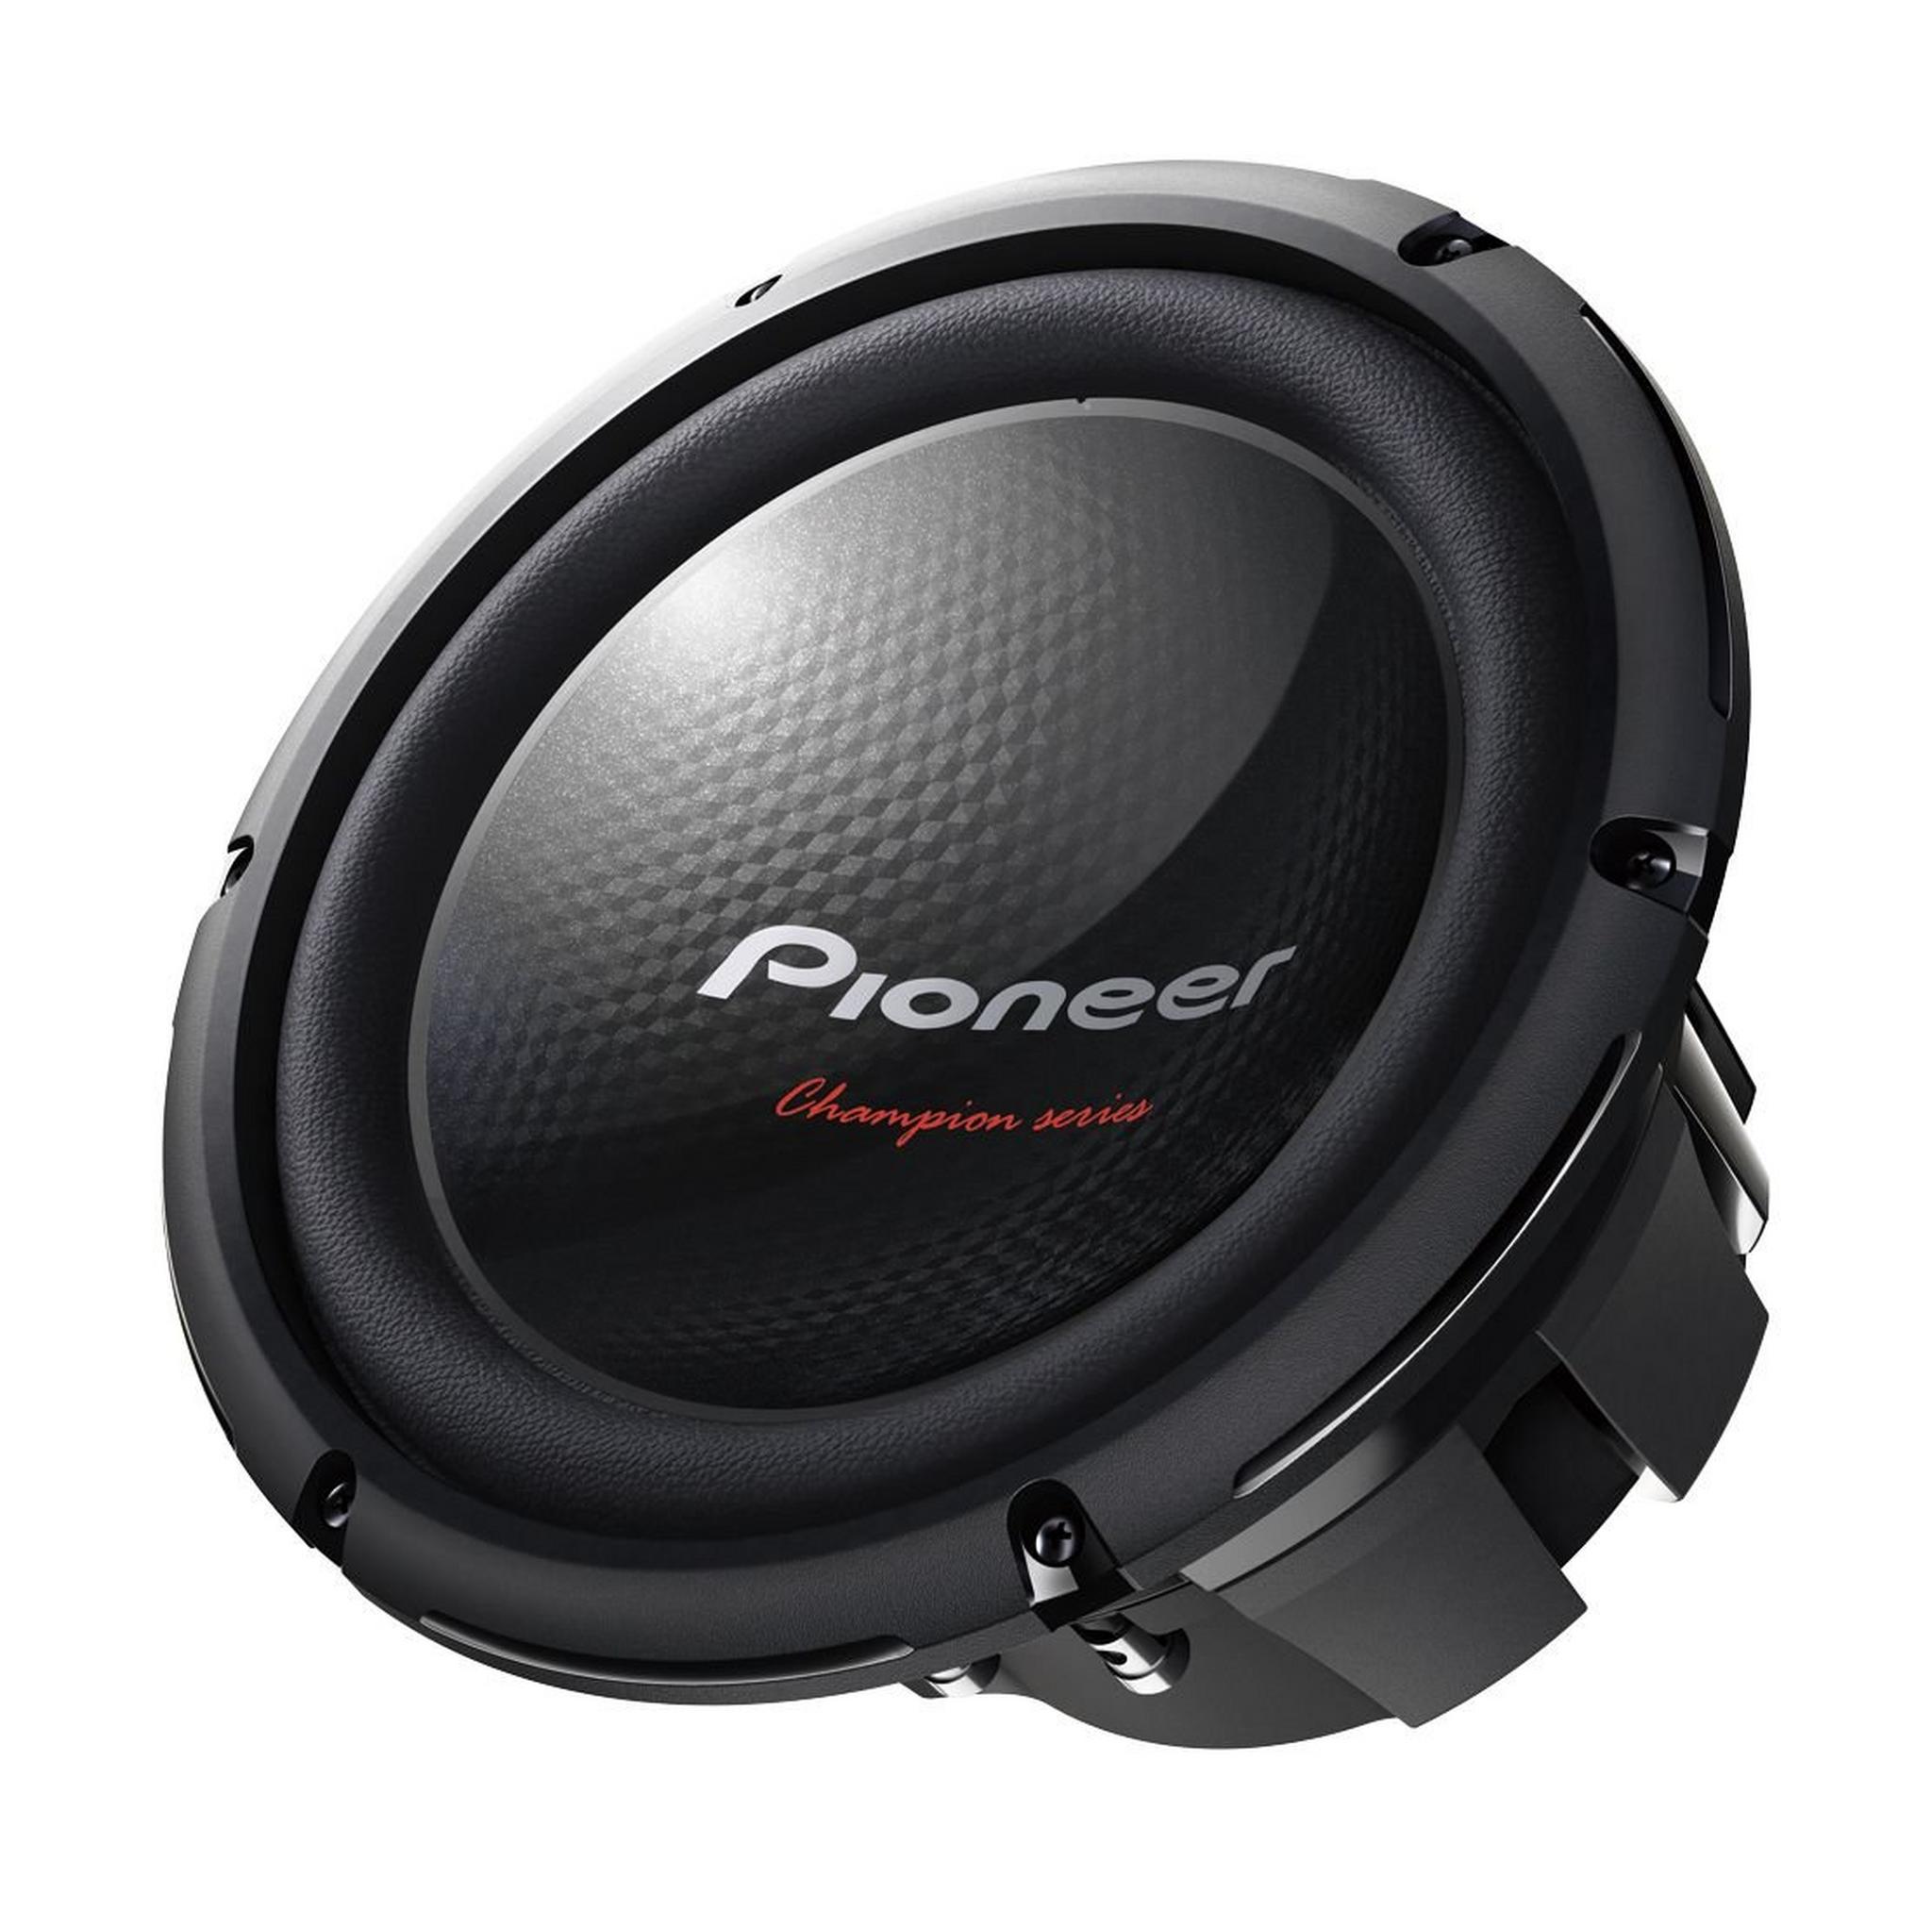 Pioneer 1200W 10-inch Champion Series Car Subwoofer (TS – W260S4)